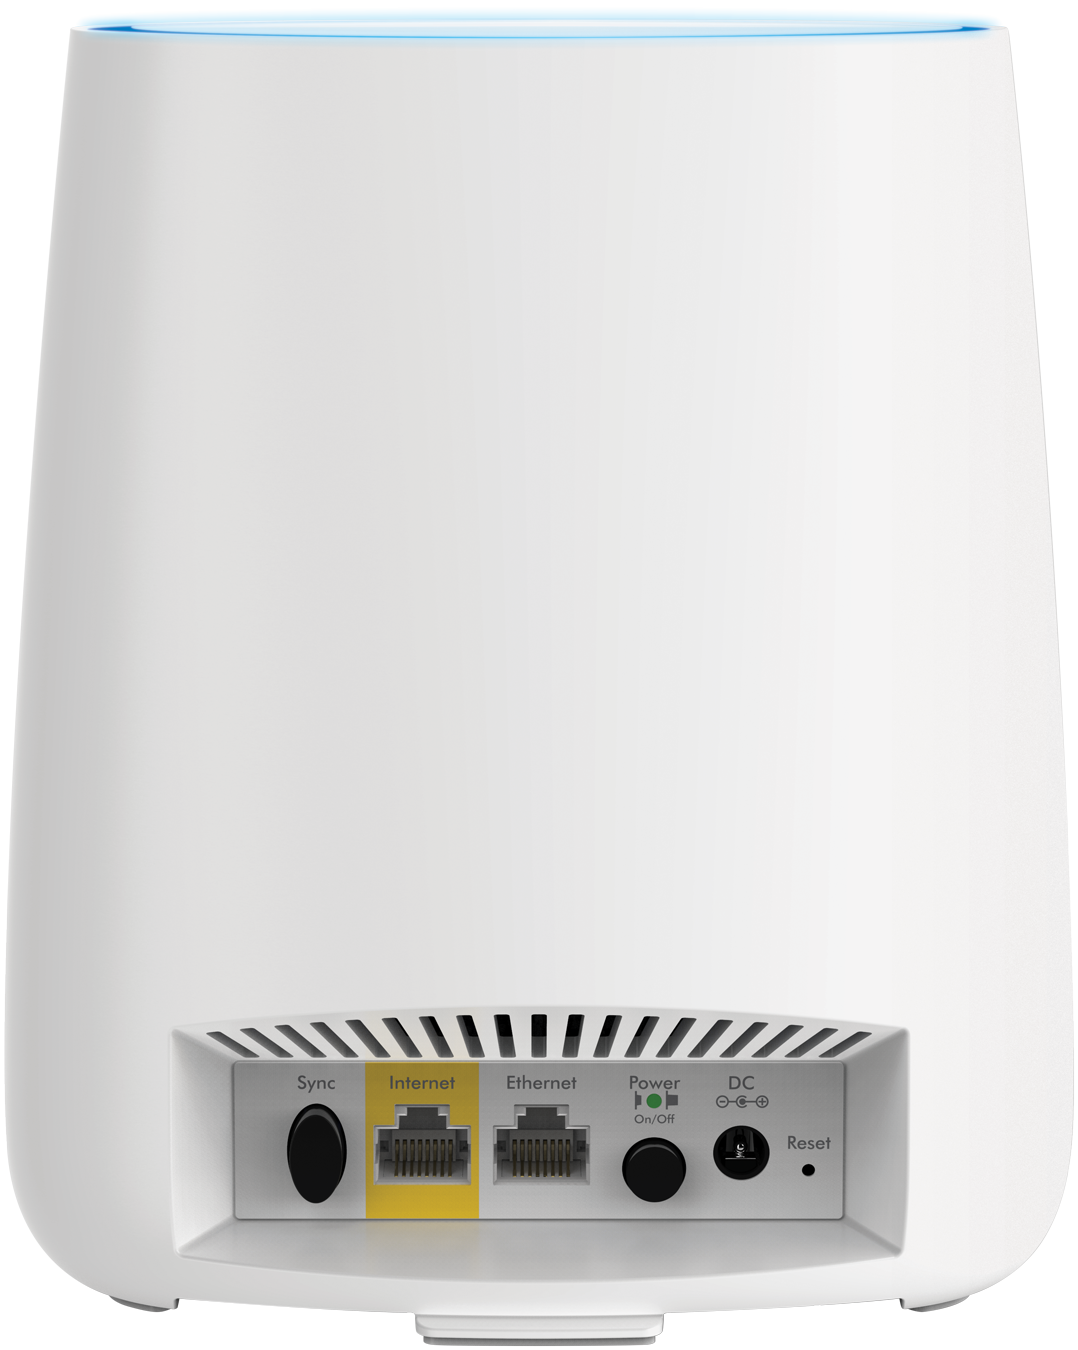 NETGEAR - Orbi RBK20W AC2200 Tri-band WiFi Mesh System with Router and Wall Plug Satellite Extender - image 5 of 5